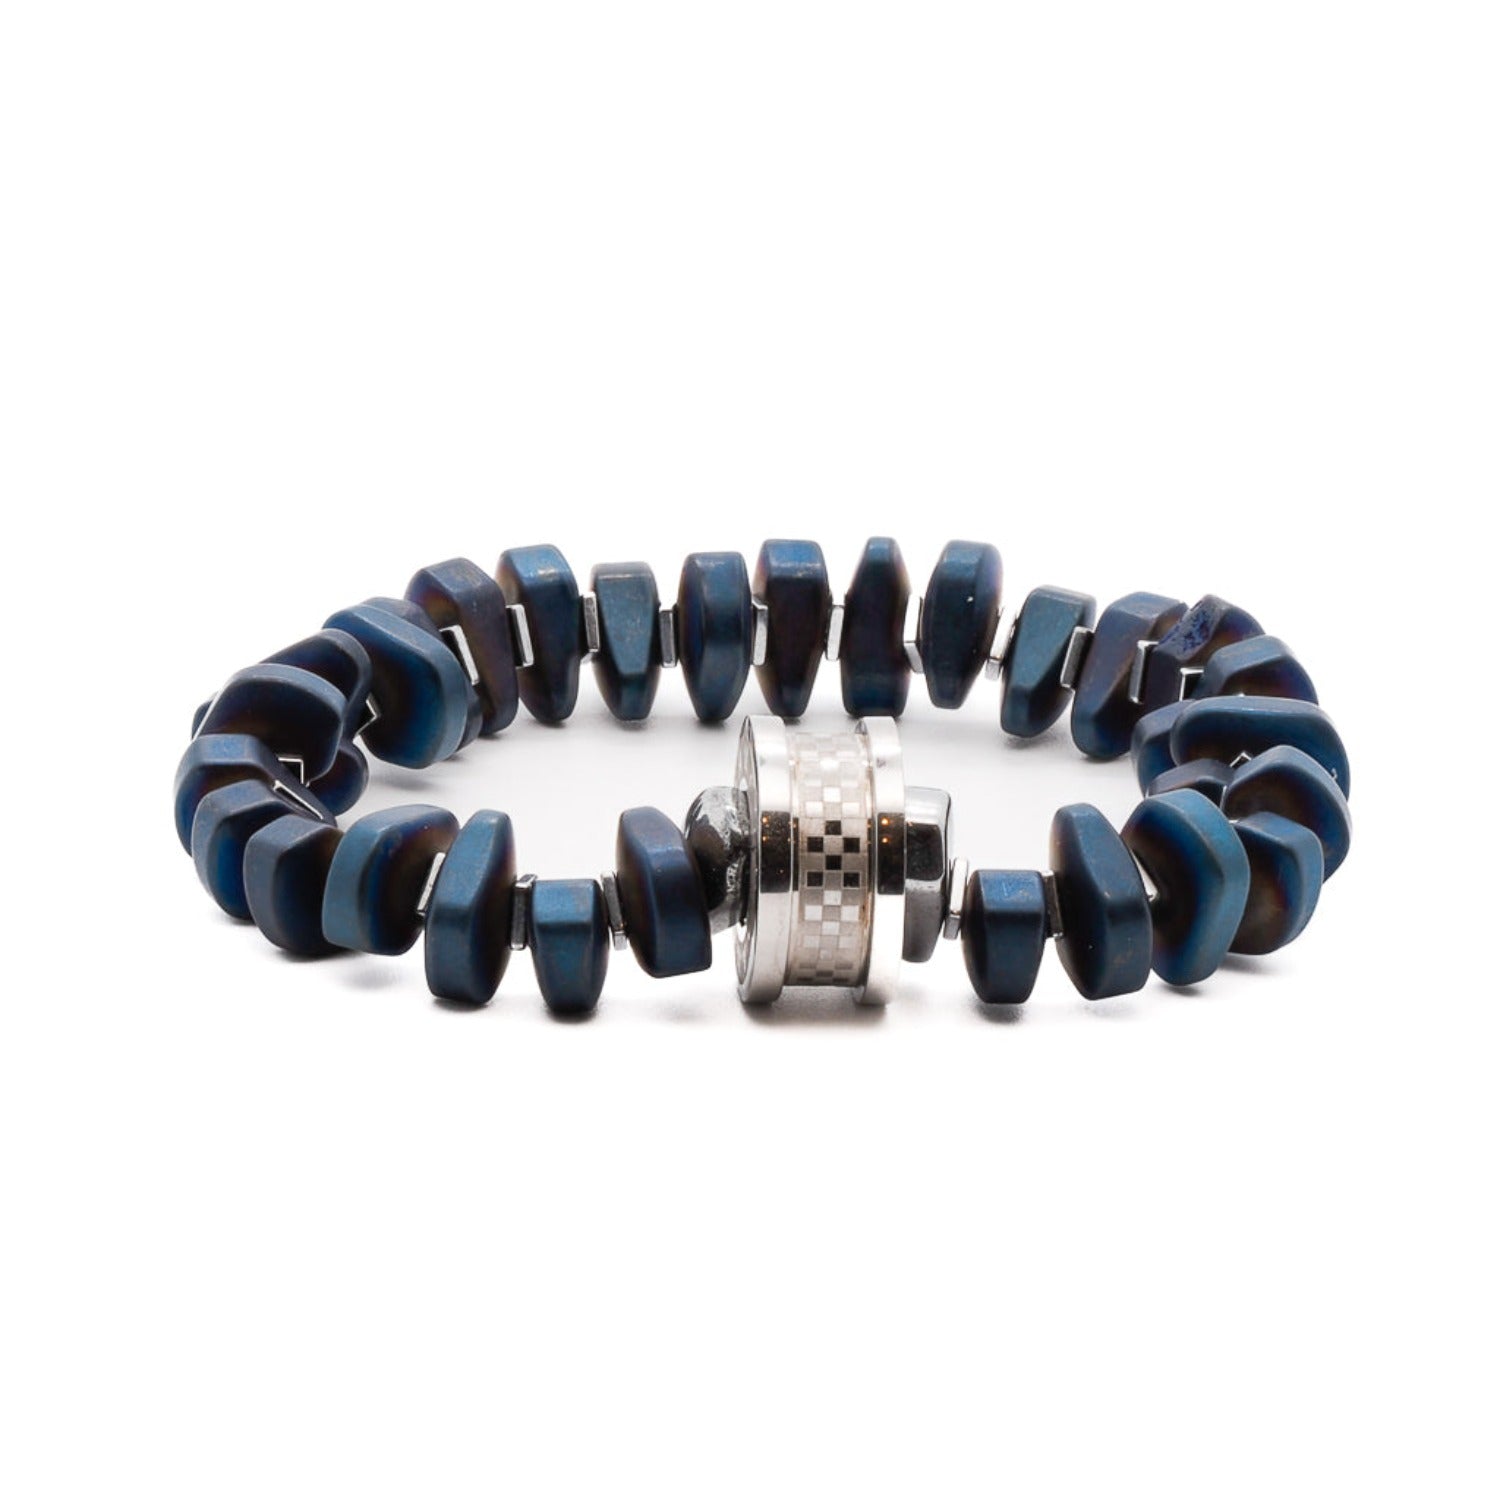 The Blue Amour Men Bracelet, featuring blue hematite nugget beads and a stainless steel amour charm